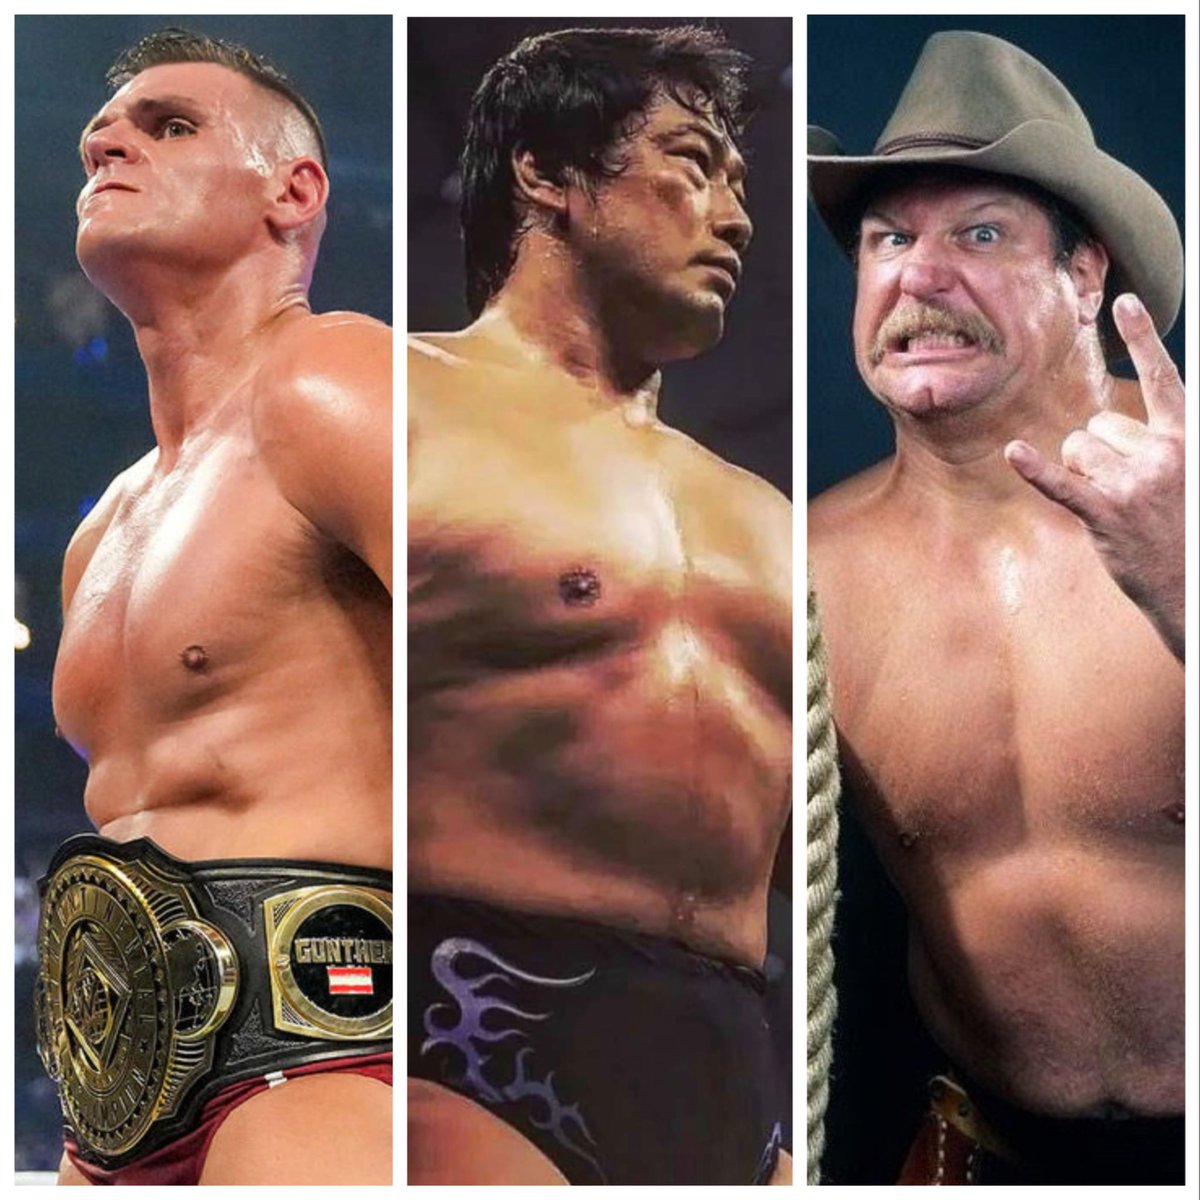 Gunther in 2020 via SI credited Kenta Kobashi & Stan Hansen as his main influences:

“I loved watching Stan Hansen and Kenta Kobashi, and they became my idols. When I began to watch matches, they helped me develop a certain style”